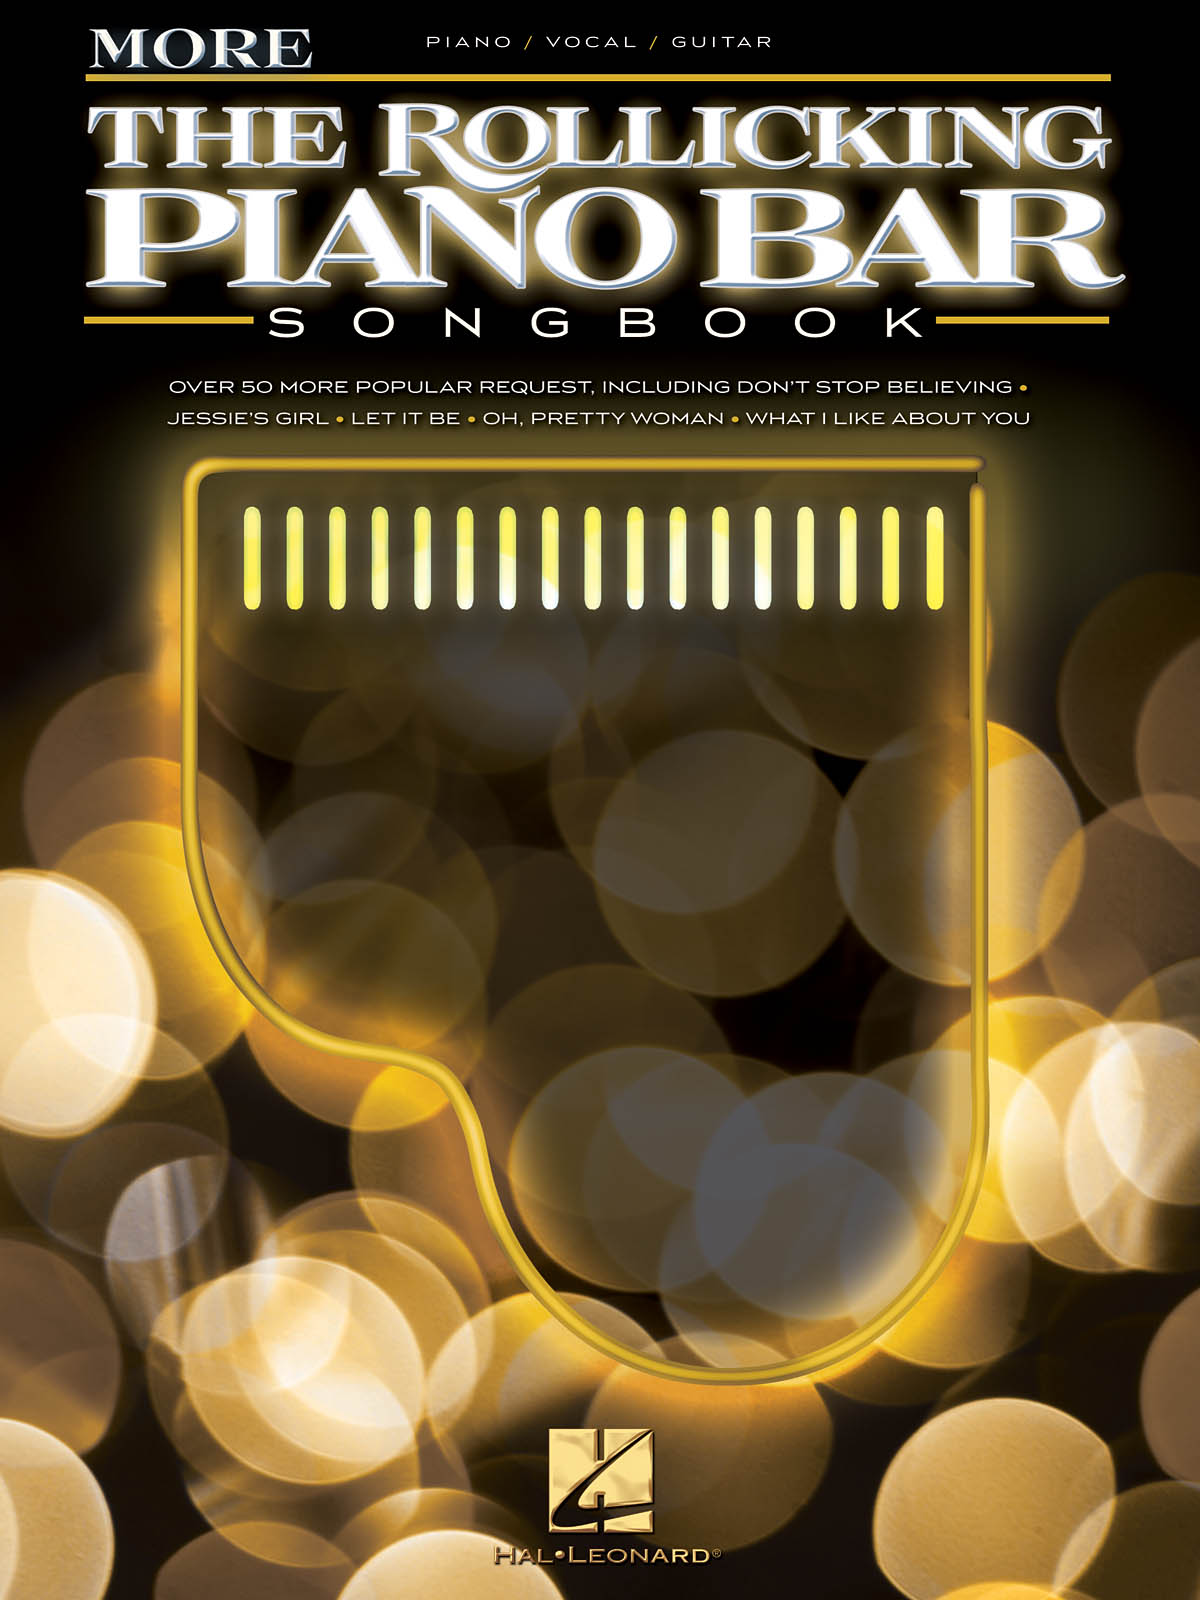 More of the Rollicking Piano Bar Songbook: Piano  Vocal and Guitar: Mixed